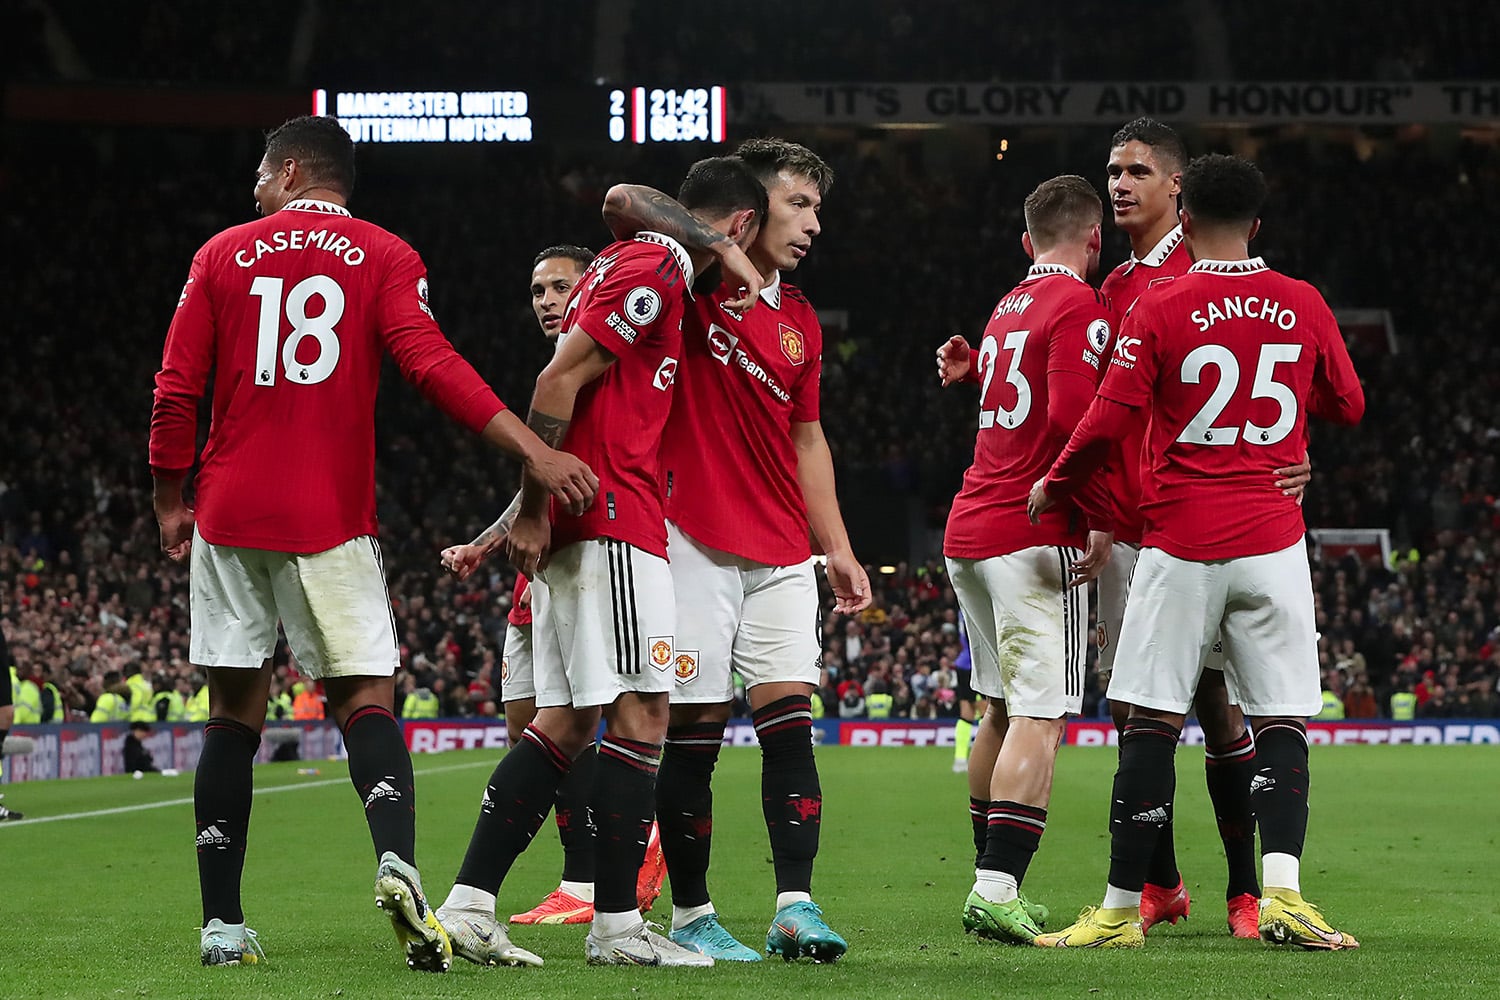 Manchester United players celebrate after scoring a goal against Tottenham Hotspurs